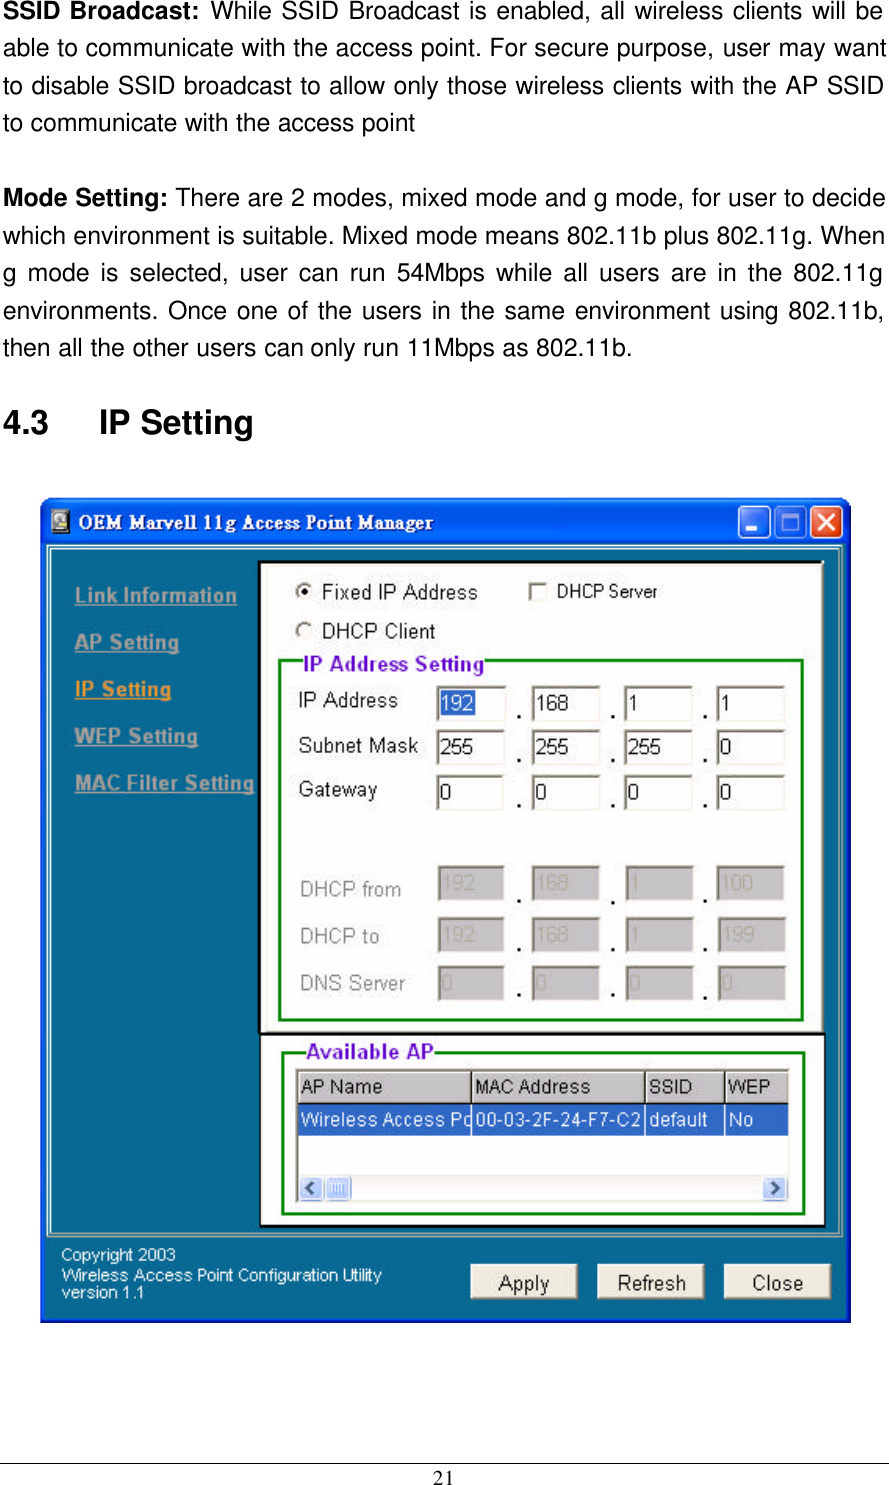  21 SSID Broadcast: While SSID Broadcast is enabled, all wireless clients will be able to communicate with the access point. For secure purpose, user may want to disable SSID broadcast to allow only those wireless clients with the AP SSID to communicate with the access point  Mode Setting: There are 2 modes, mixed mode and g mode, for user to decide which environment is suitable. Mixed mode means 802.11b plus 802.11g. When g mode is selected, user can run 54Mbps while all users are in the 802.11g environments. Once one of the users in the same environment using 802.11b, then all the other users can only run 11Mbps as 802.11b. 4.3    IP Setting    